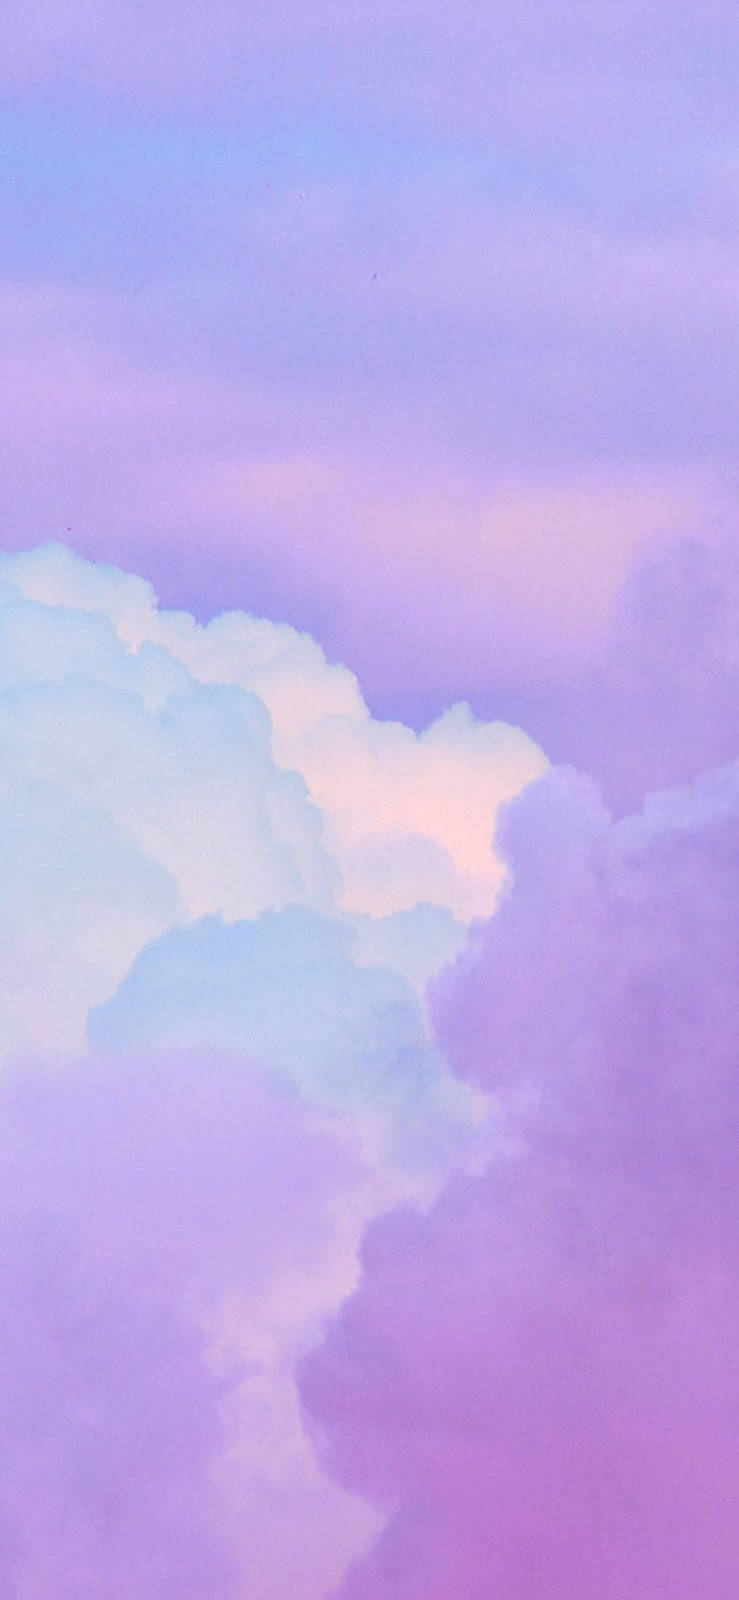 Download Cotton Candy Cloud Aesthetic Iphone 11 Wallpaper | Wallpapers.com